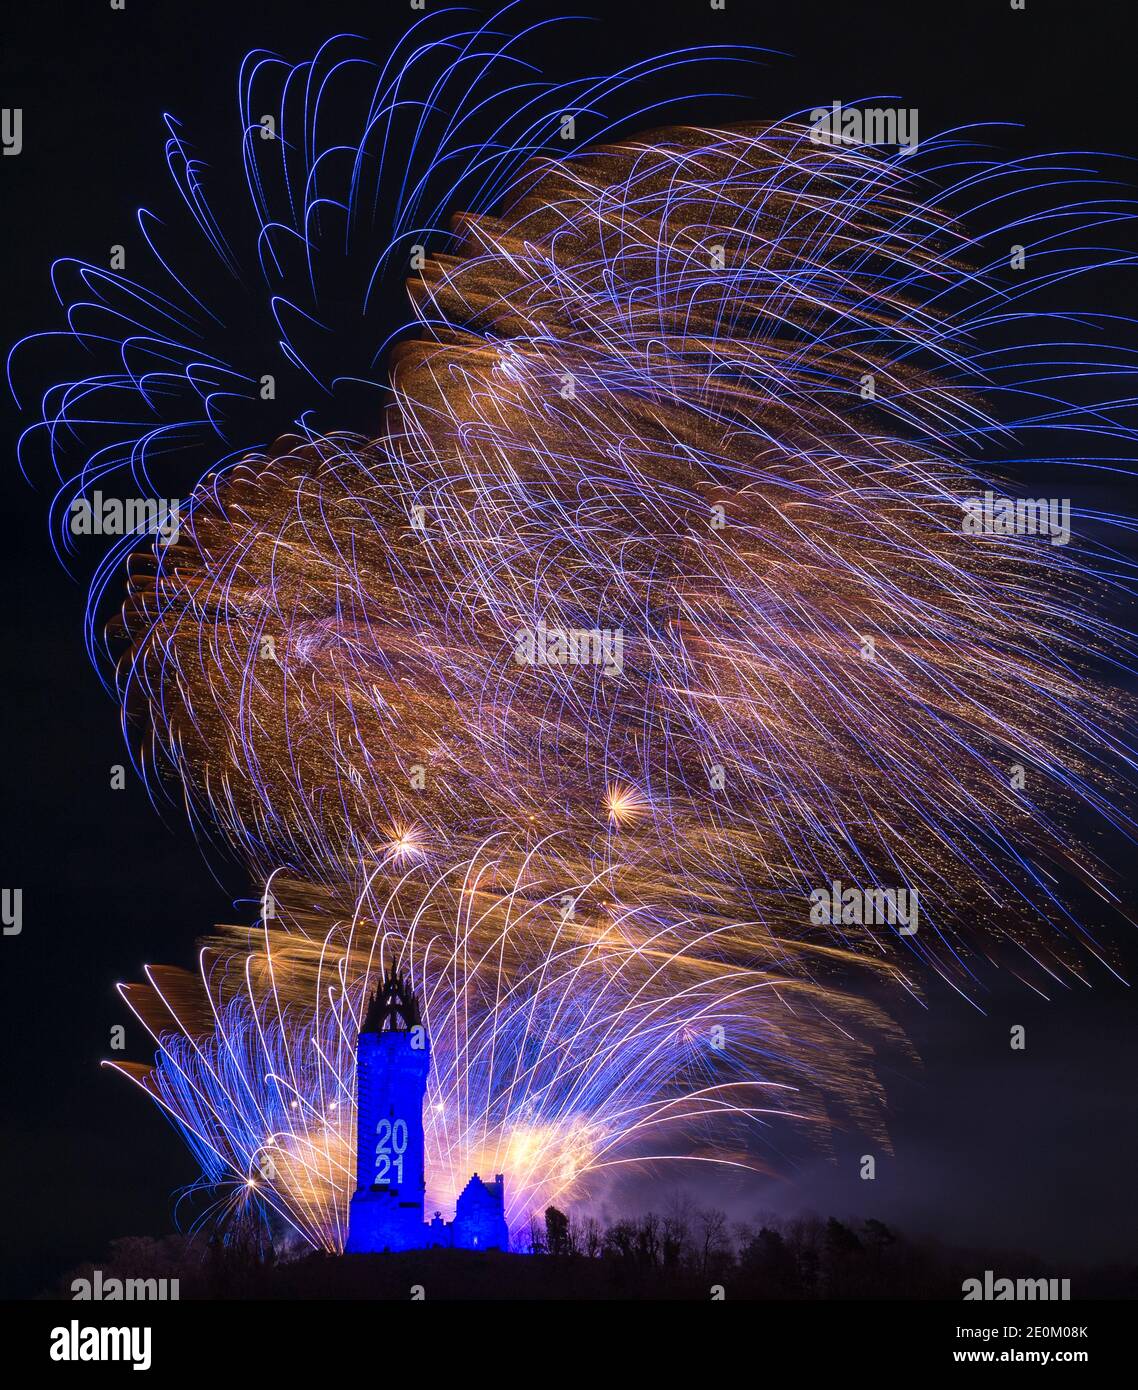 Stirling, Scotland, UK. 1 January 2021. Pictured: Hogmanay pyrotechnic spectacular closes off 2020 and brings in 2021 with a bang as colourful explosions burst lighting up the new year night sky 600feet above the Wallace Monument in Stirling. Due to the coronavirus (COVID19) pandemic the show will be live streamed on TV and online since Scotland is in phase 4 lockdown. Edinburgh based events company, 21CC Events Ltd, pyrotechnic specialists have spent the last few days setting up the show including powerful projection lights for the monuments facade. Credit: Colin Fisher/Alamy Live News. Stock Photo